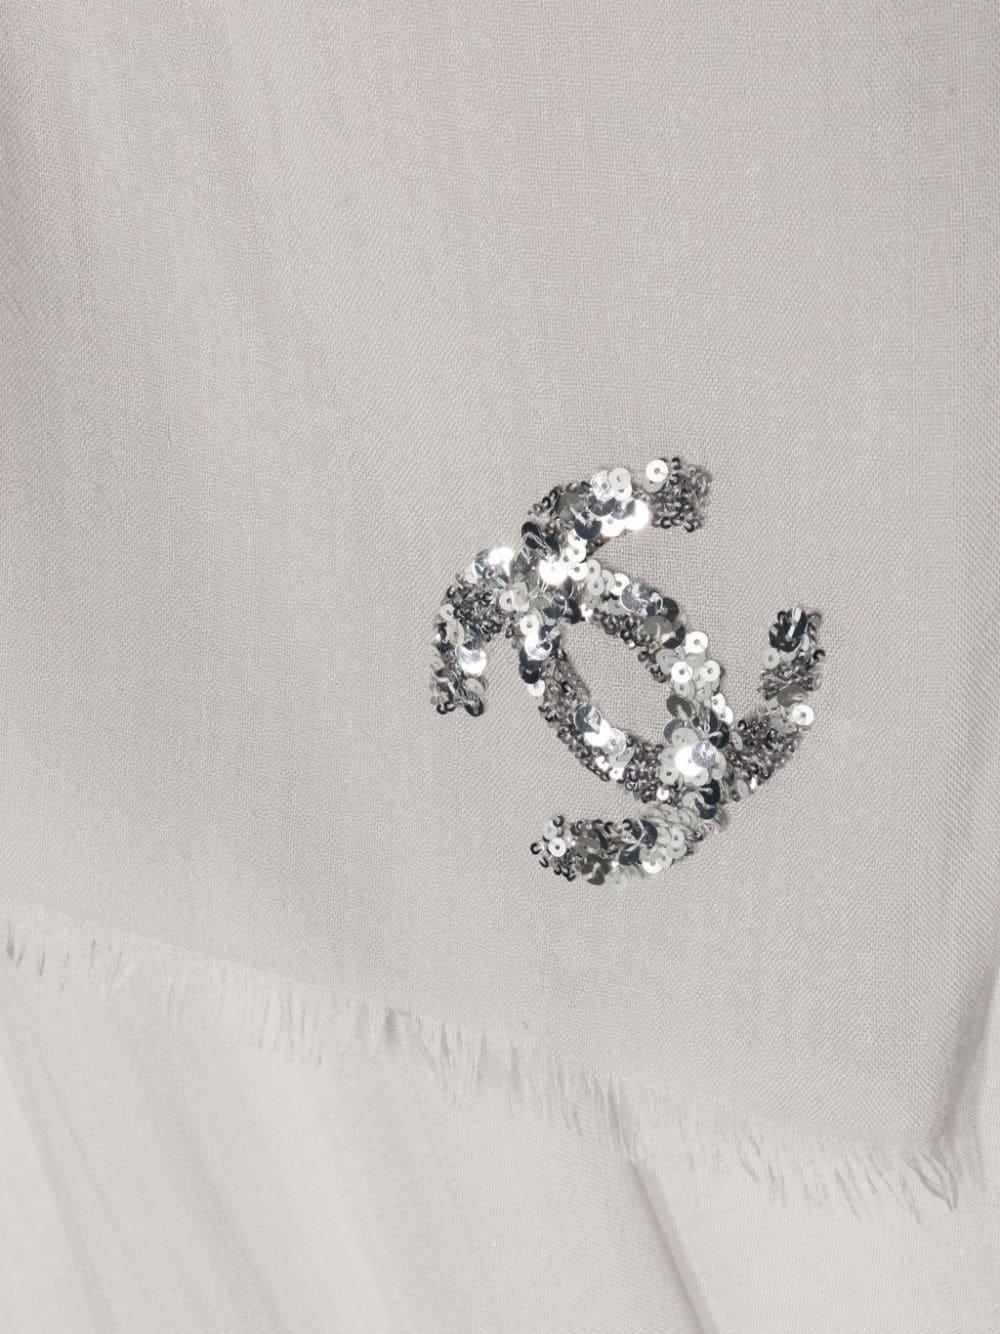 This authentic Chanel scarf features delicate hand-rolling and stitching, ensuring a high-quality and luxurious finish. The signature interlocking CC logo at the front corner adds a touch of elegance to any outfit, making it a must-have accessory